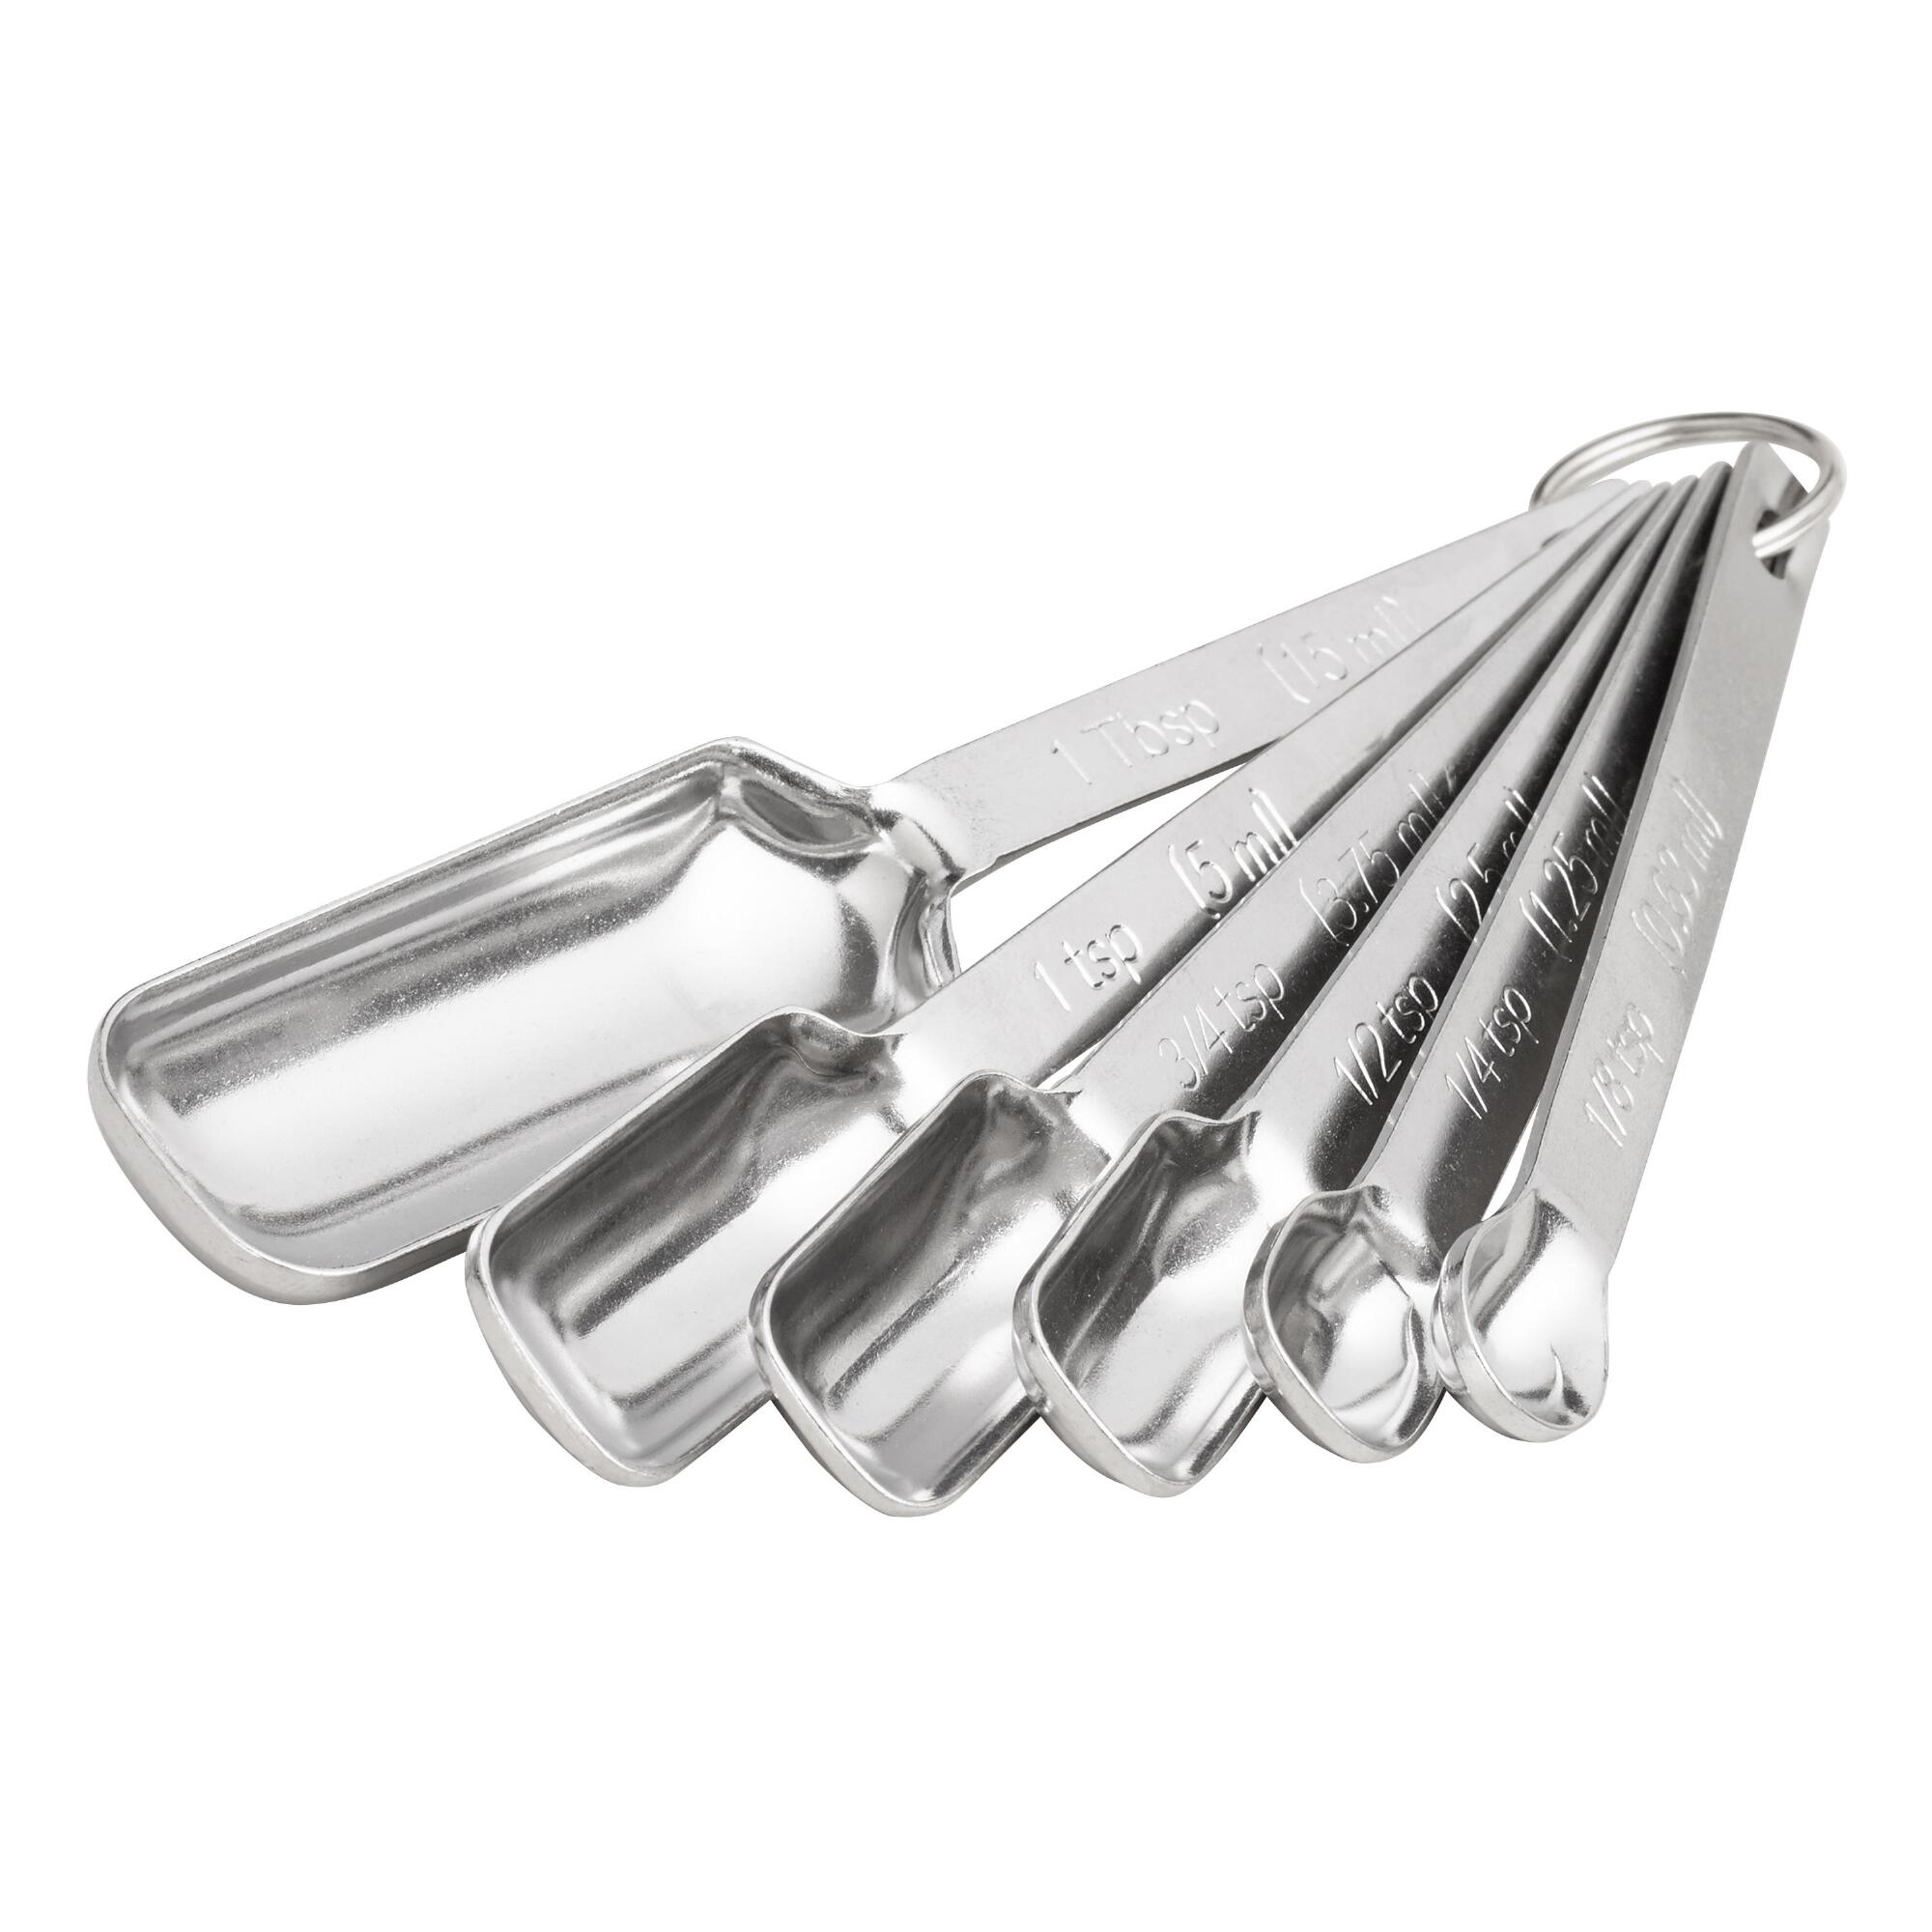 Rectangular Stainless Steel Measuring Spoon Set: Silver by World Market